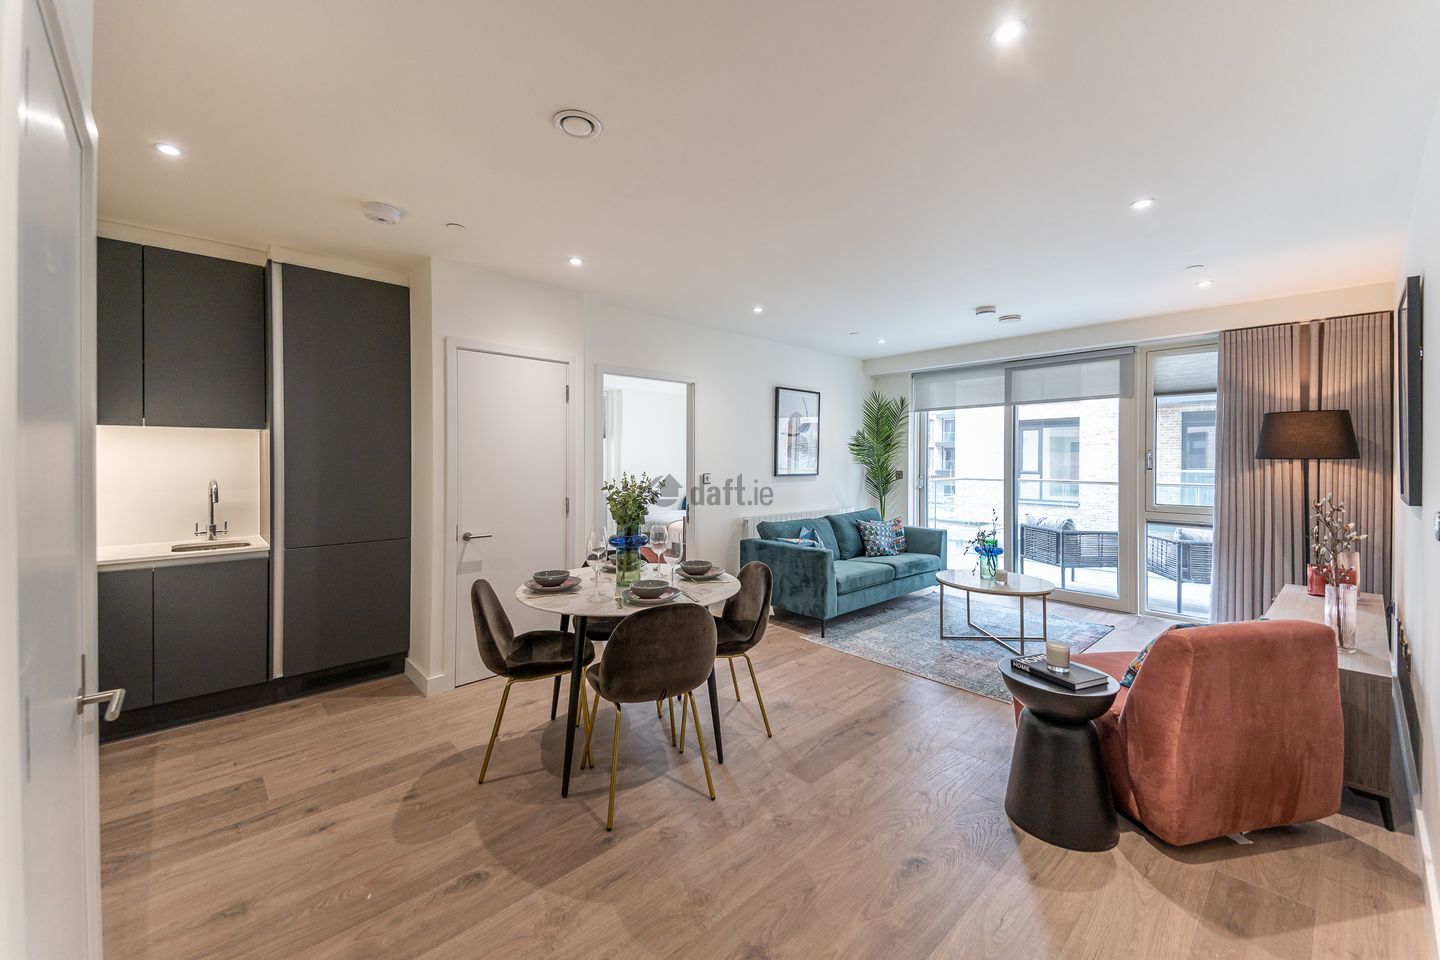 2 Bedroom Apartment, Spencer Place, Spencer Place, Dublin 1